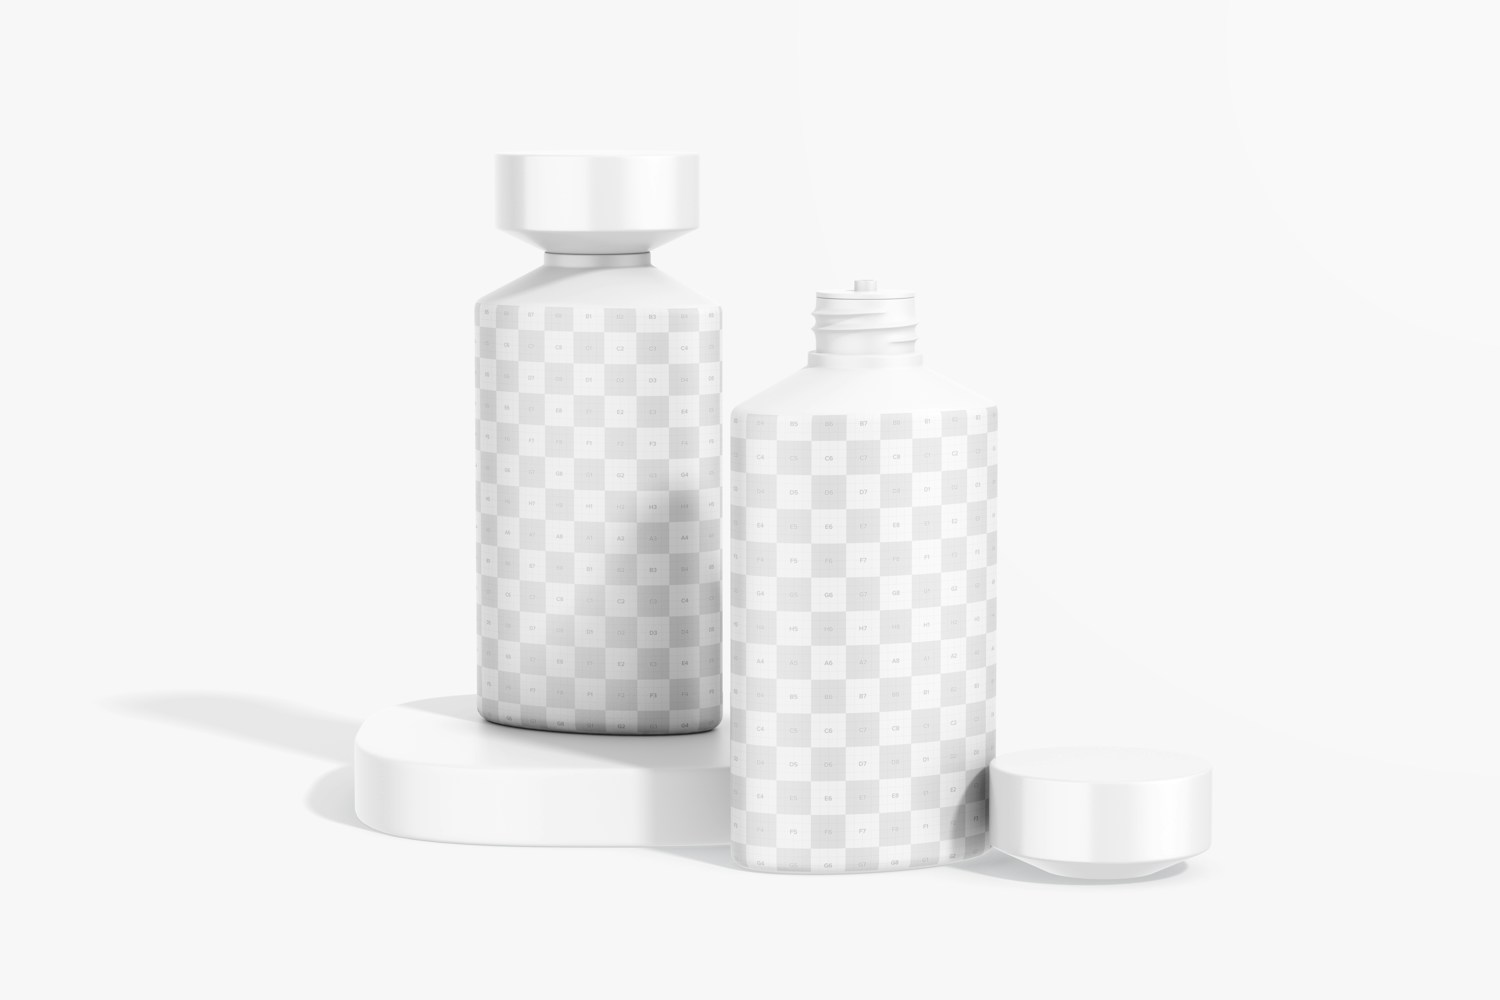 150 ml Skin Oil Bottles Mockup, Opened and Closed